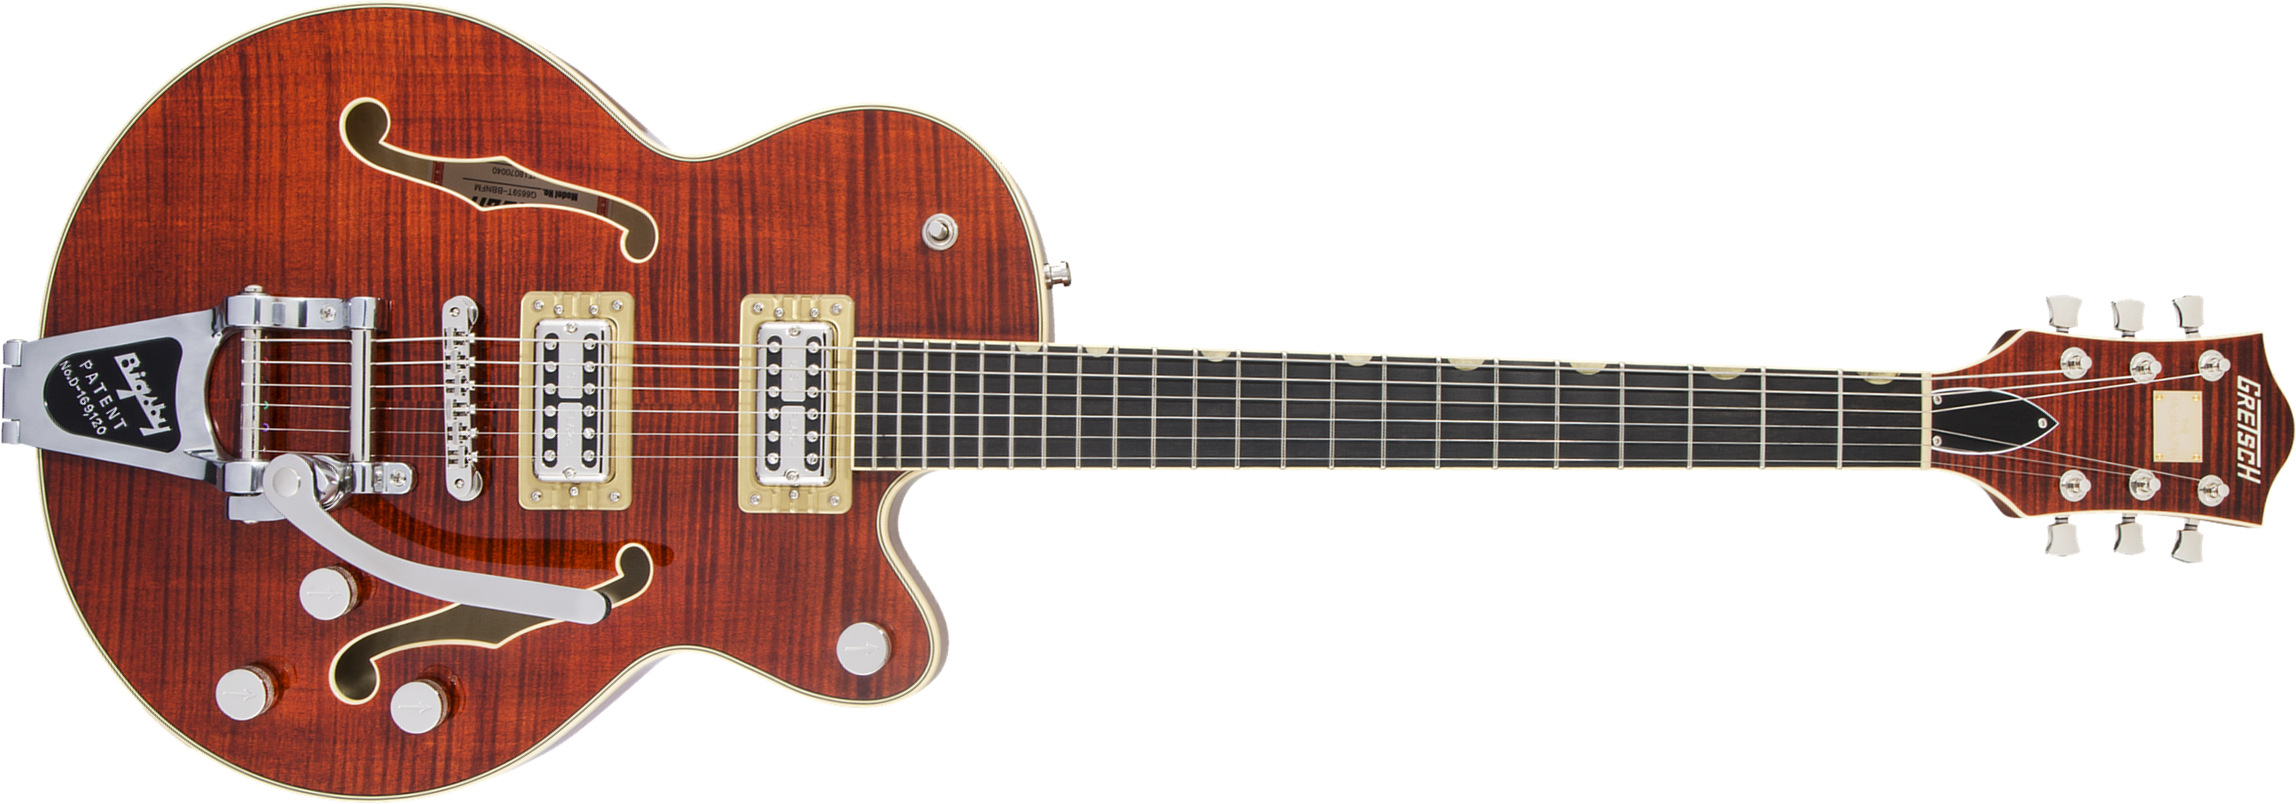 Gretsch G6659tfm Broadkaster Jr Center Bloc Players Edition Nashville Professional Japon Bigsby Eb - Bourbon Stain - Semi-hollow electric guitar - Mai